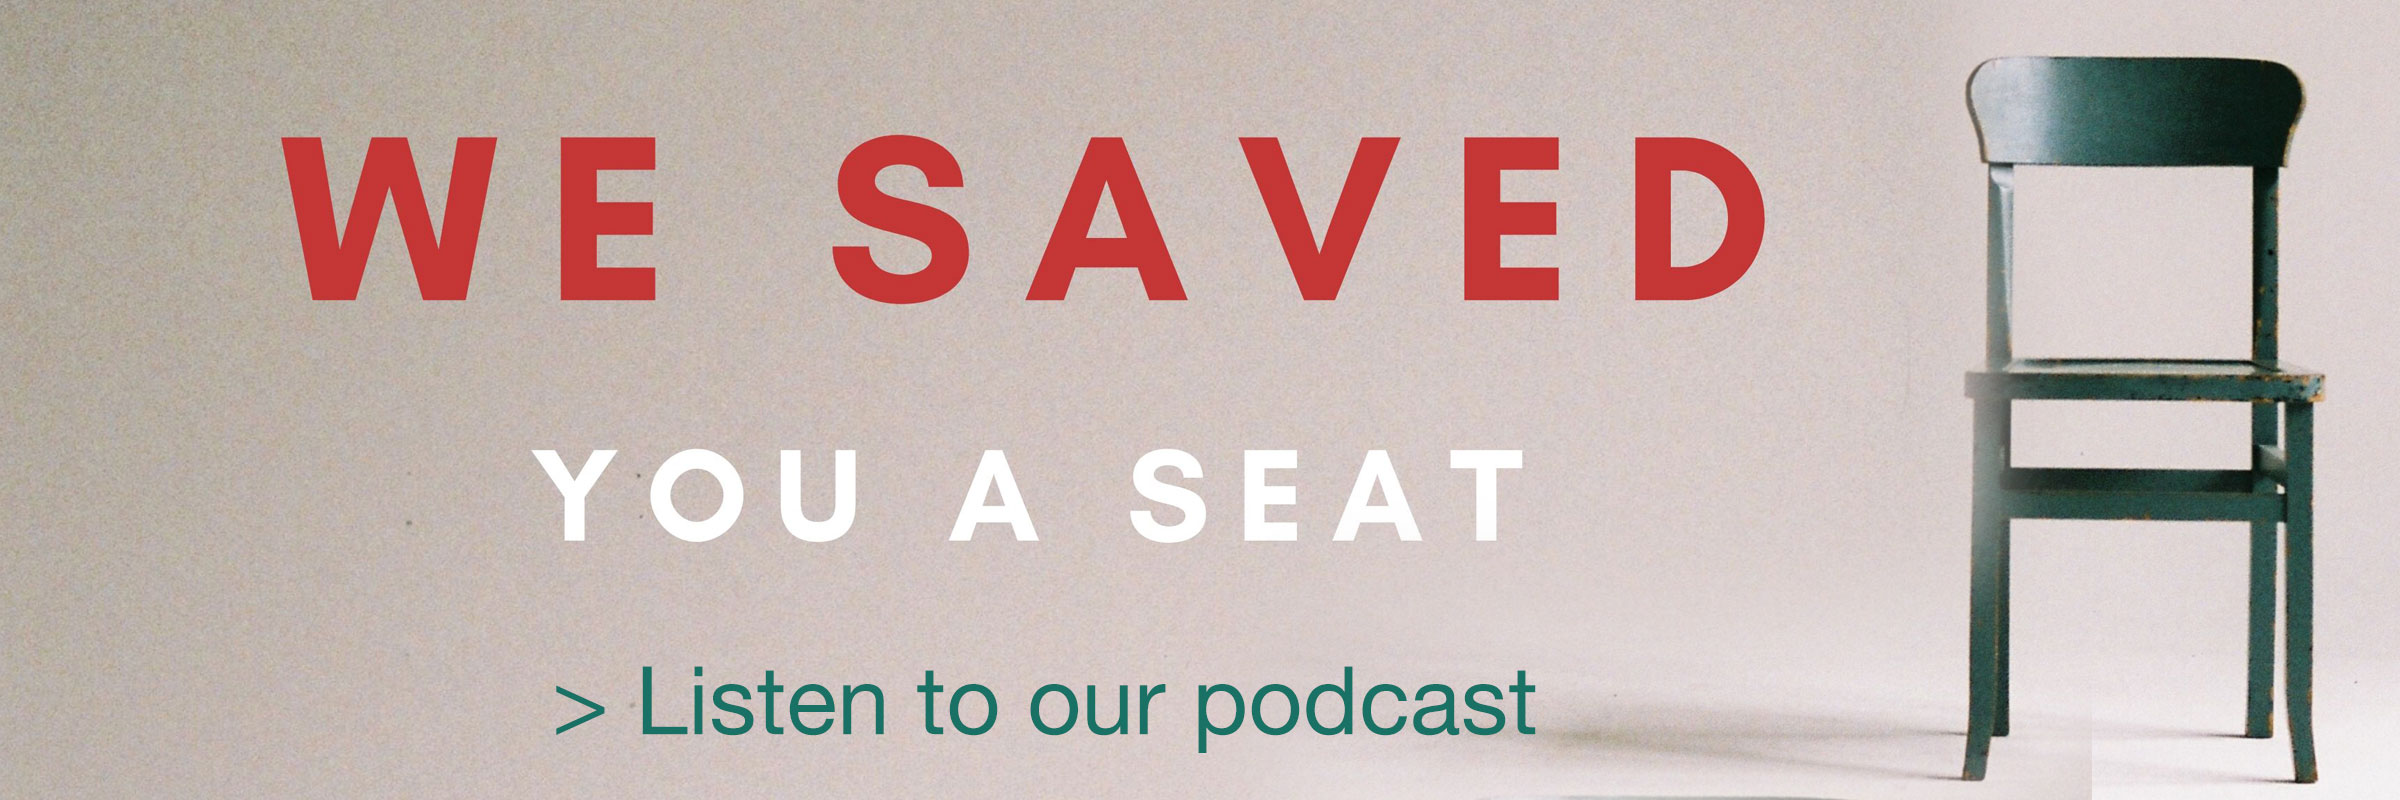 banner for we saved you a seat podcast